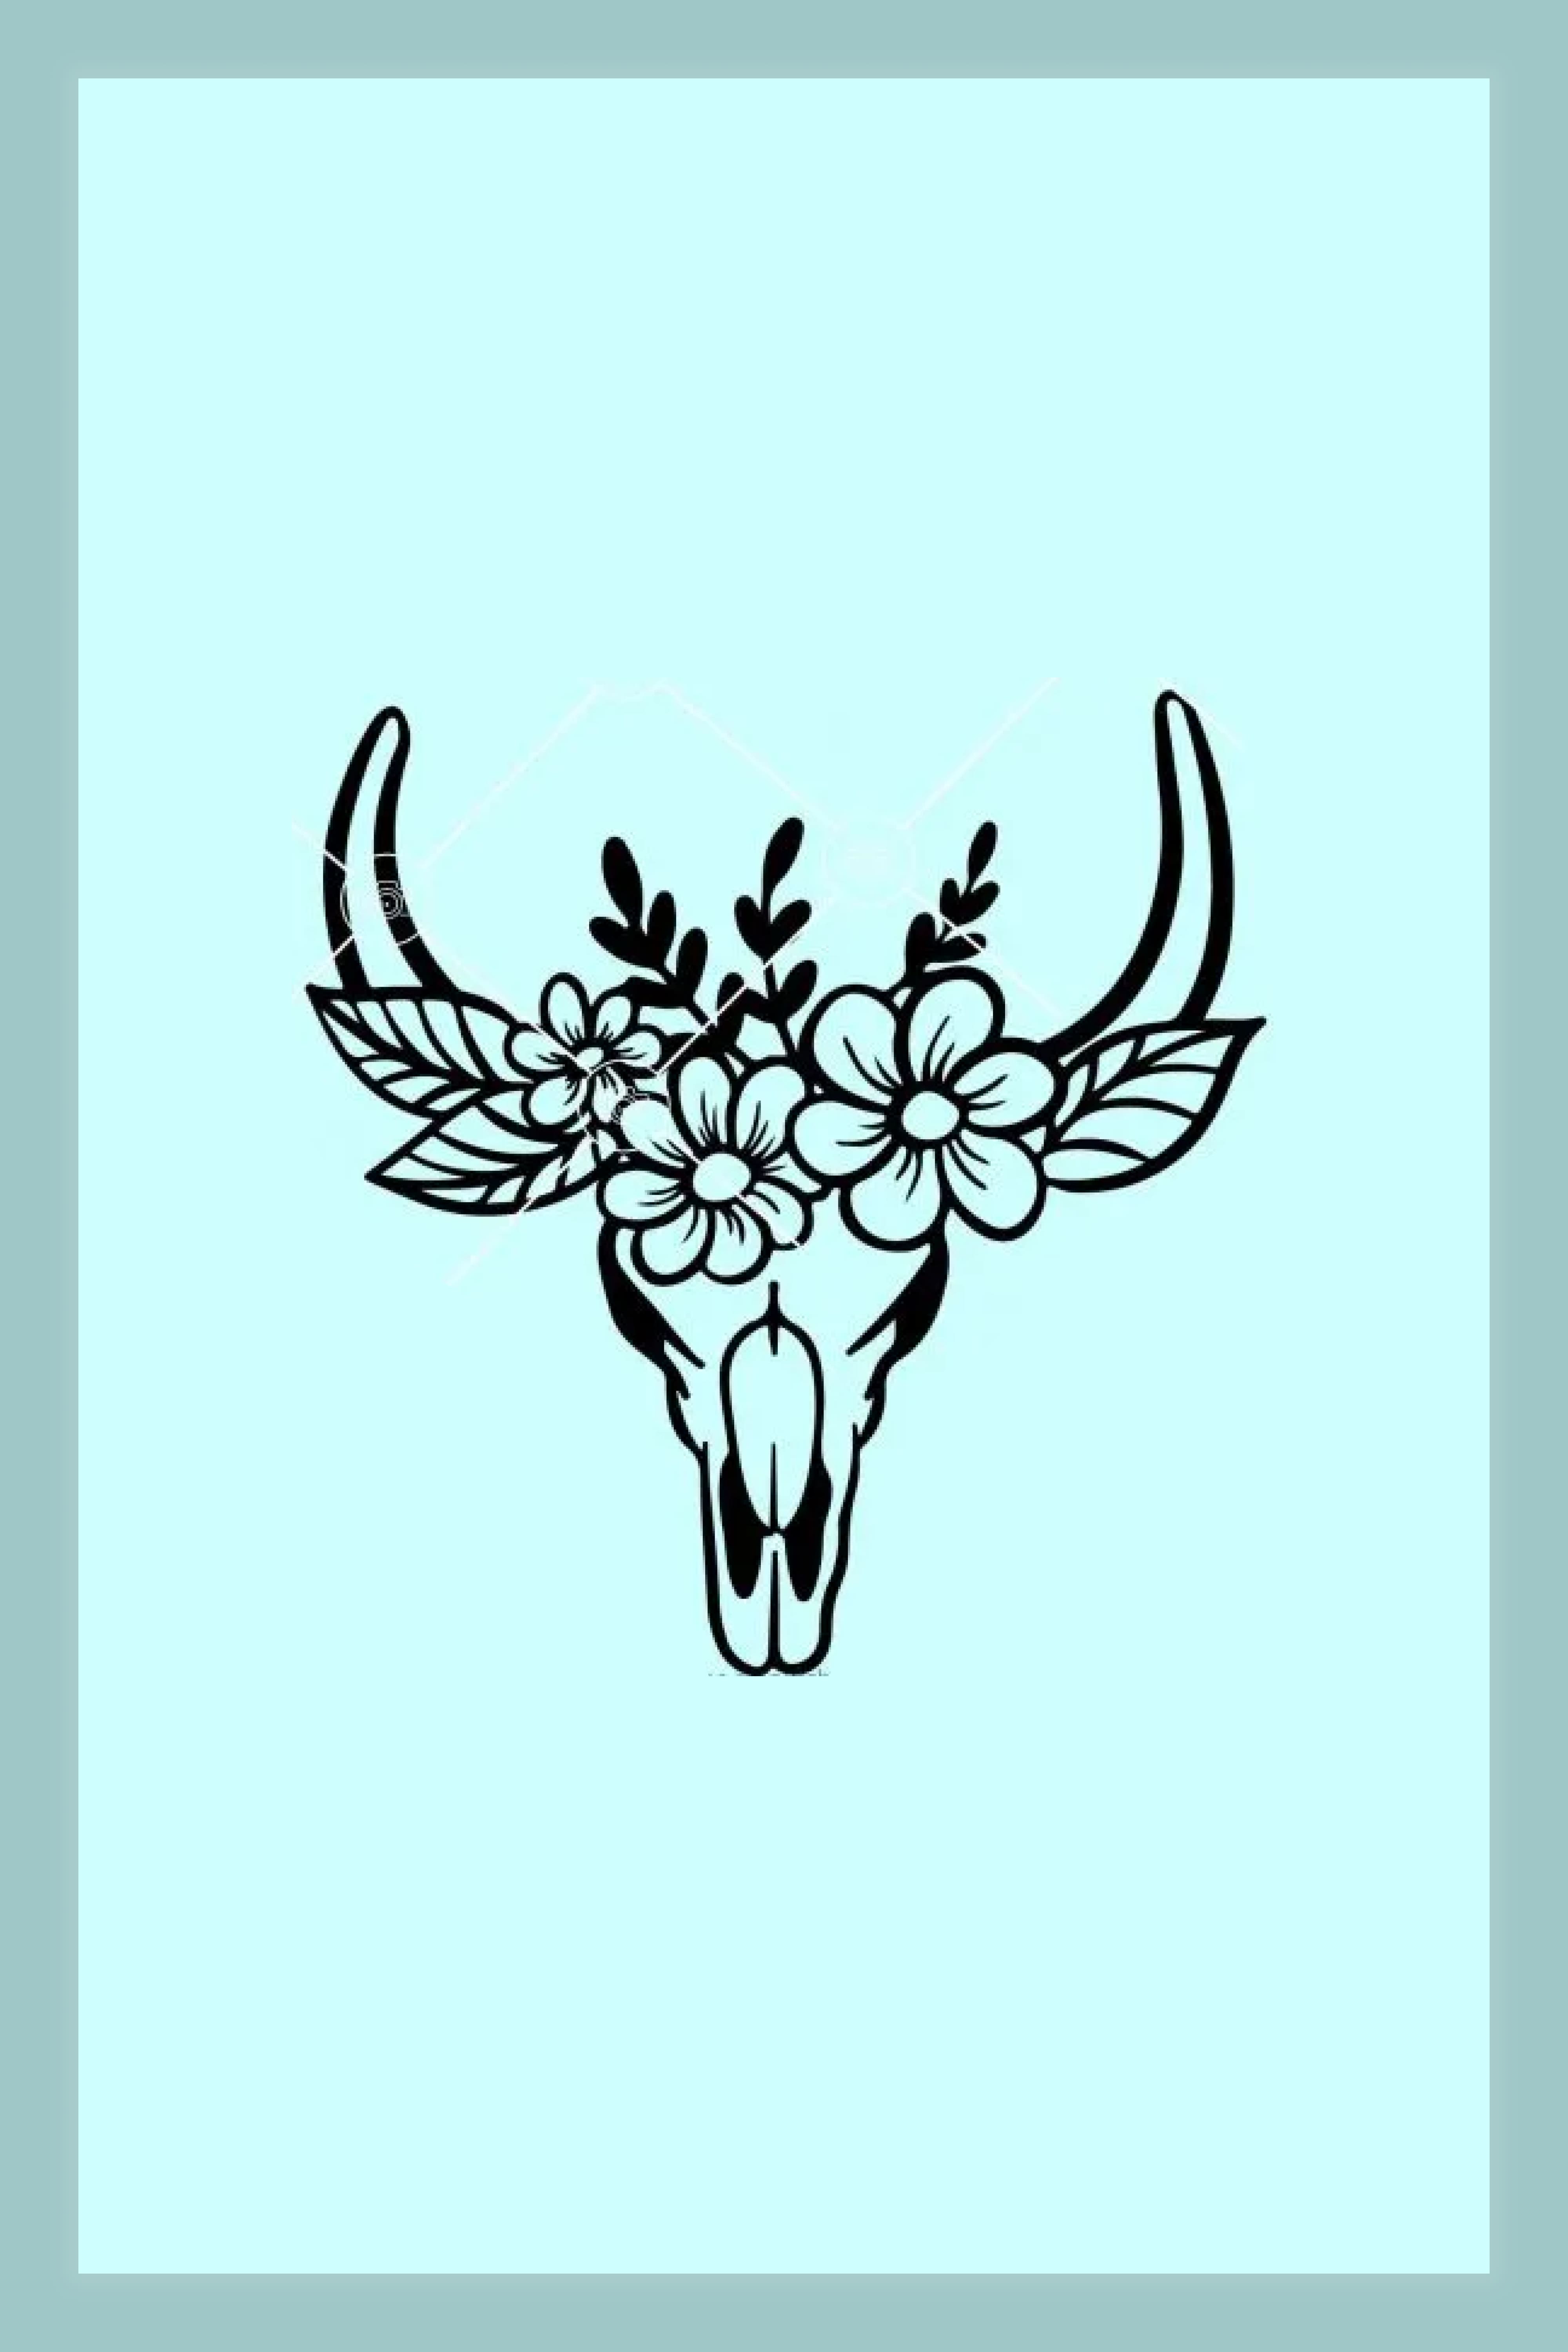 An image of a bull skull with flowers on its forehead.